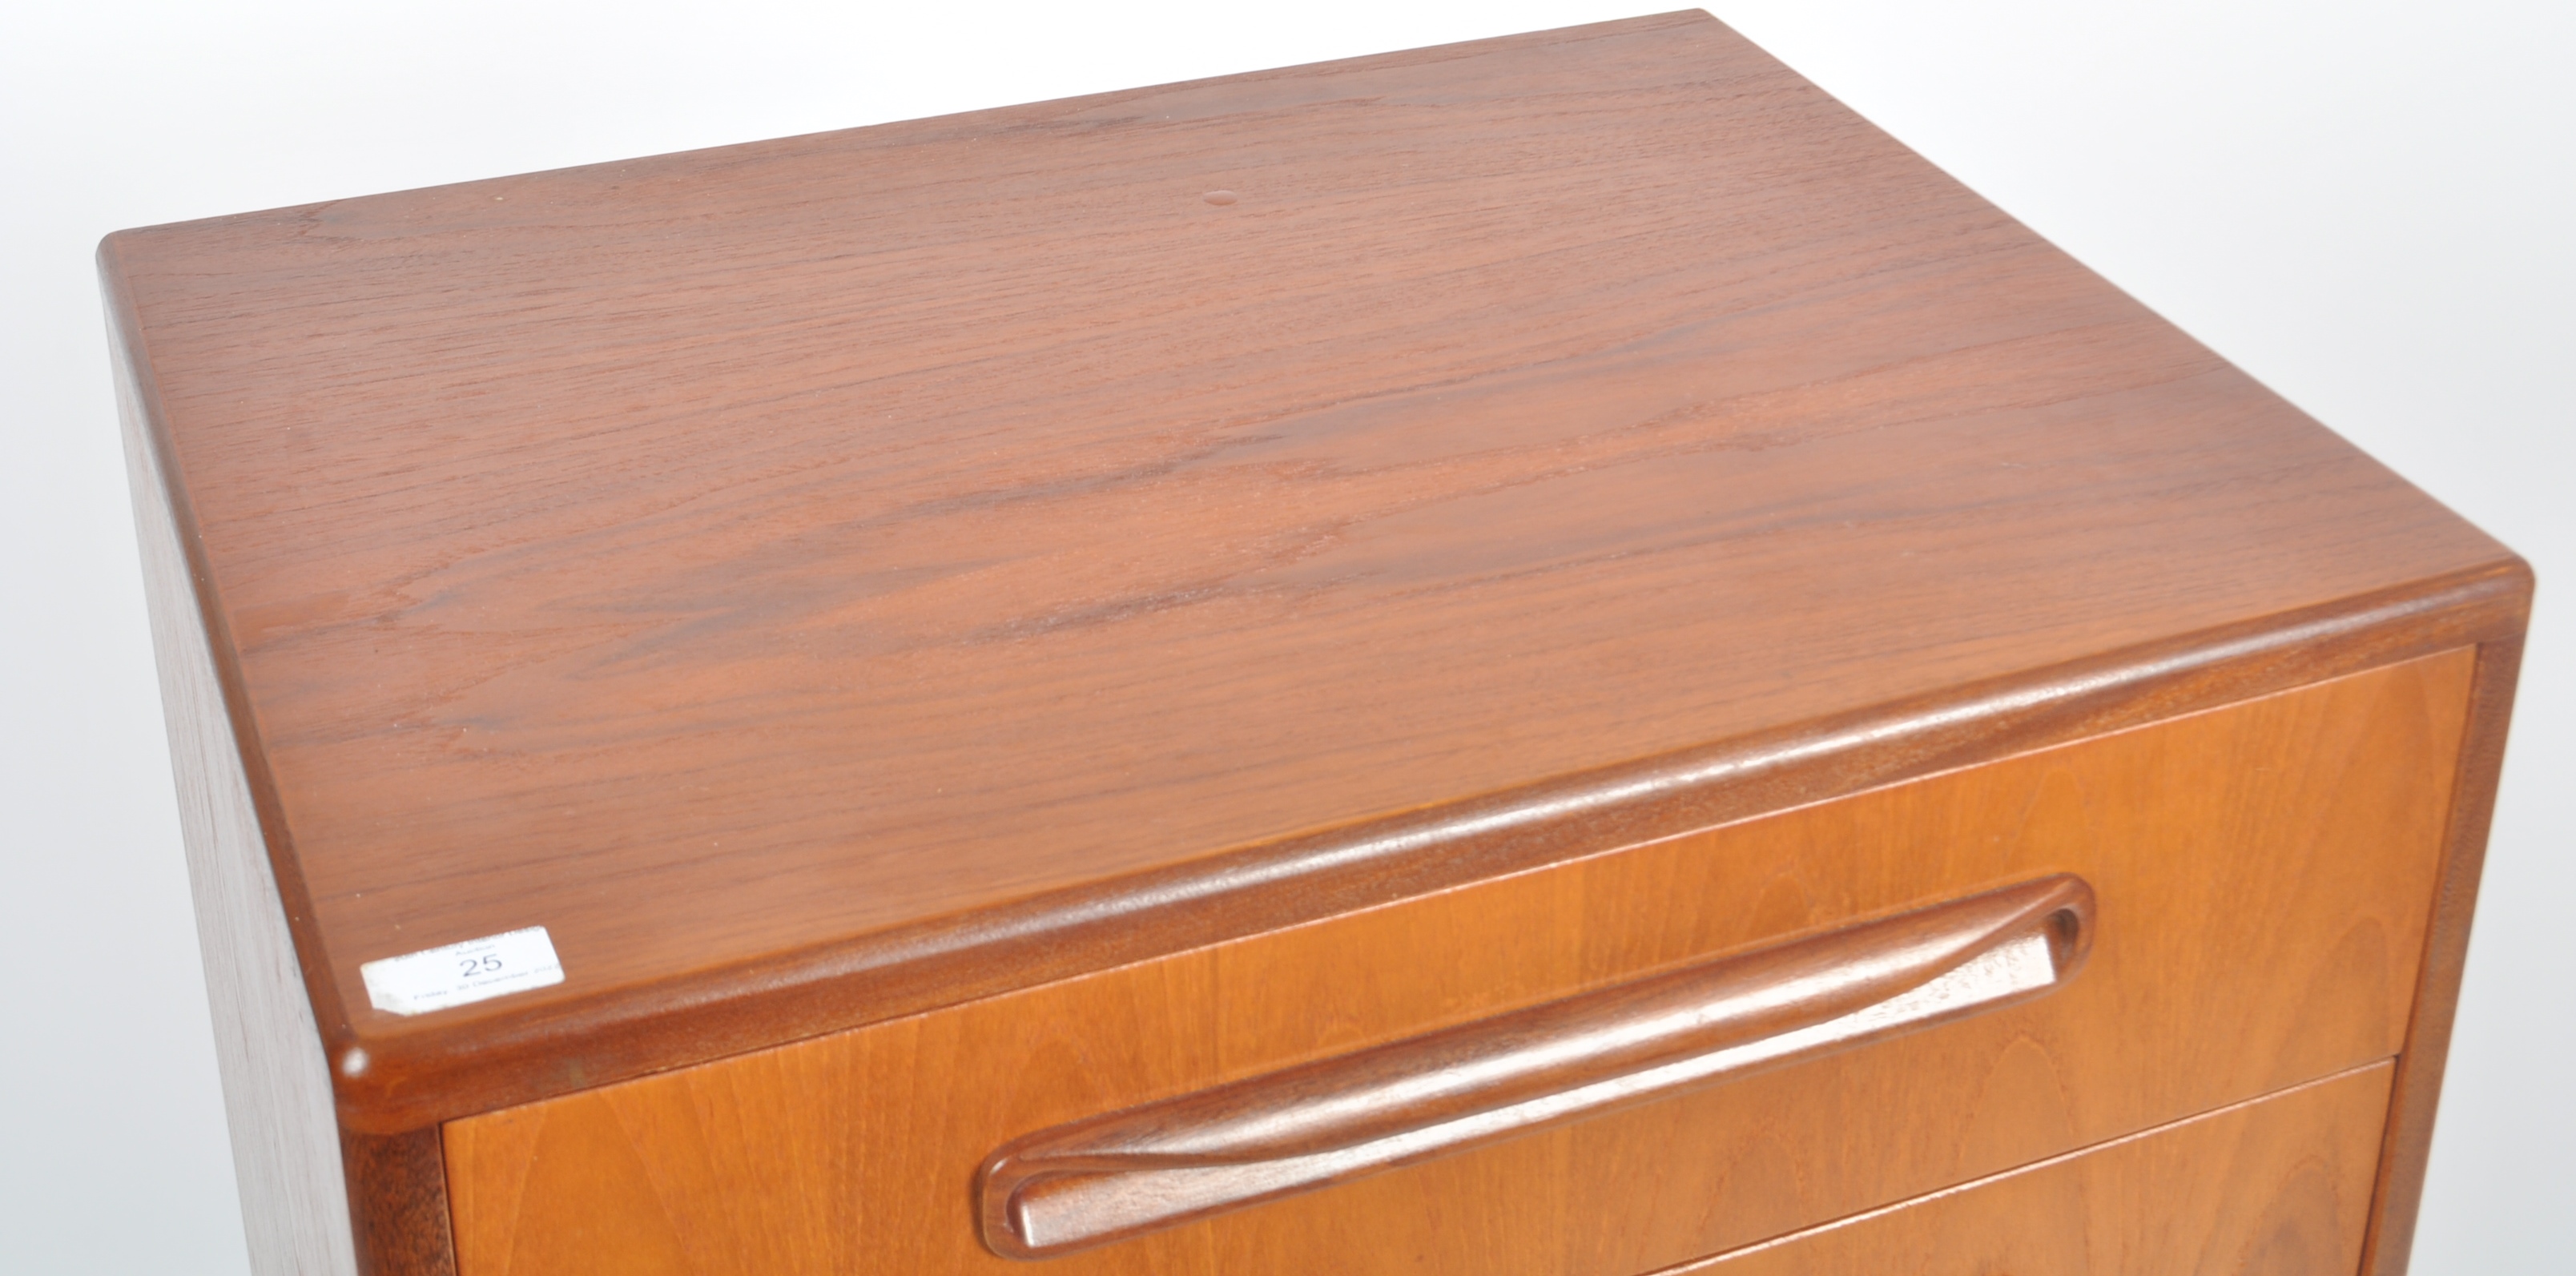 VICTOR WILKINS FOR G PLAN - 1960S SIX DRAWER CHEST - Image 3 of 10